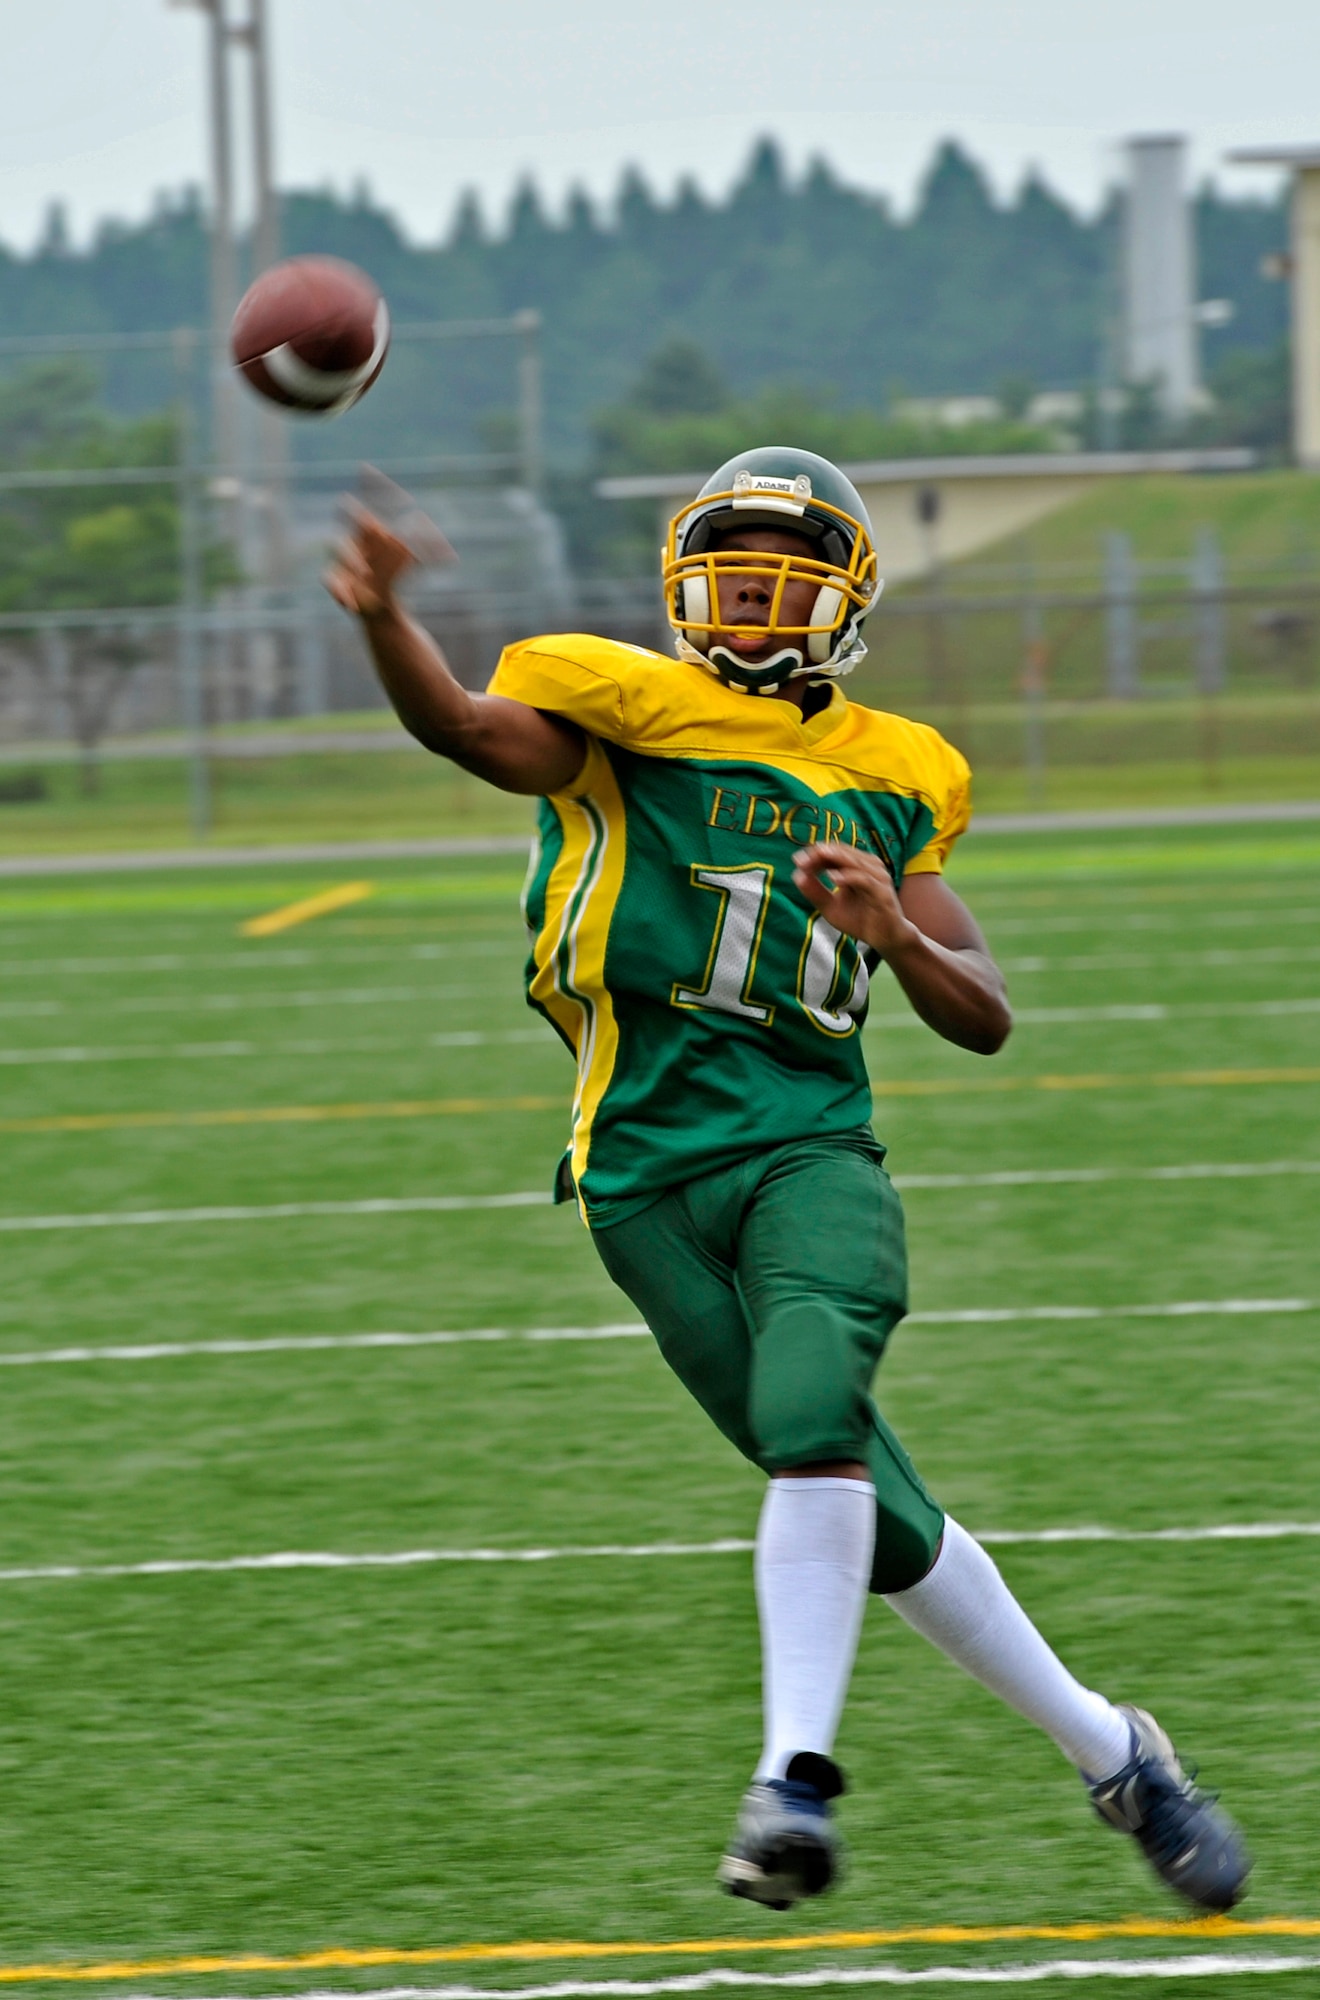 Khaleem Shabazz, Edgren High School sophomore quarterback, attempts a pass as he scrambles to his right during a scrimmage against the Tohoku Gakuin University football team at Misawa Air Base, Japan, Aug.18, 2013. Shabazz led the Eagles to a 14-14 tie while throwing for two touchdown passes, with one coming in the closing seconds of the game. (U.S. Air Force photo by Airman 1st Class Zachary Kee)